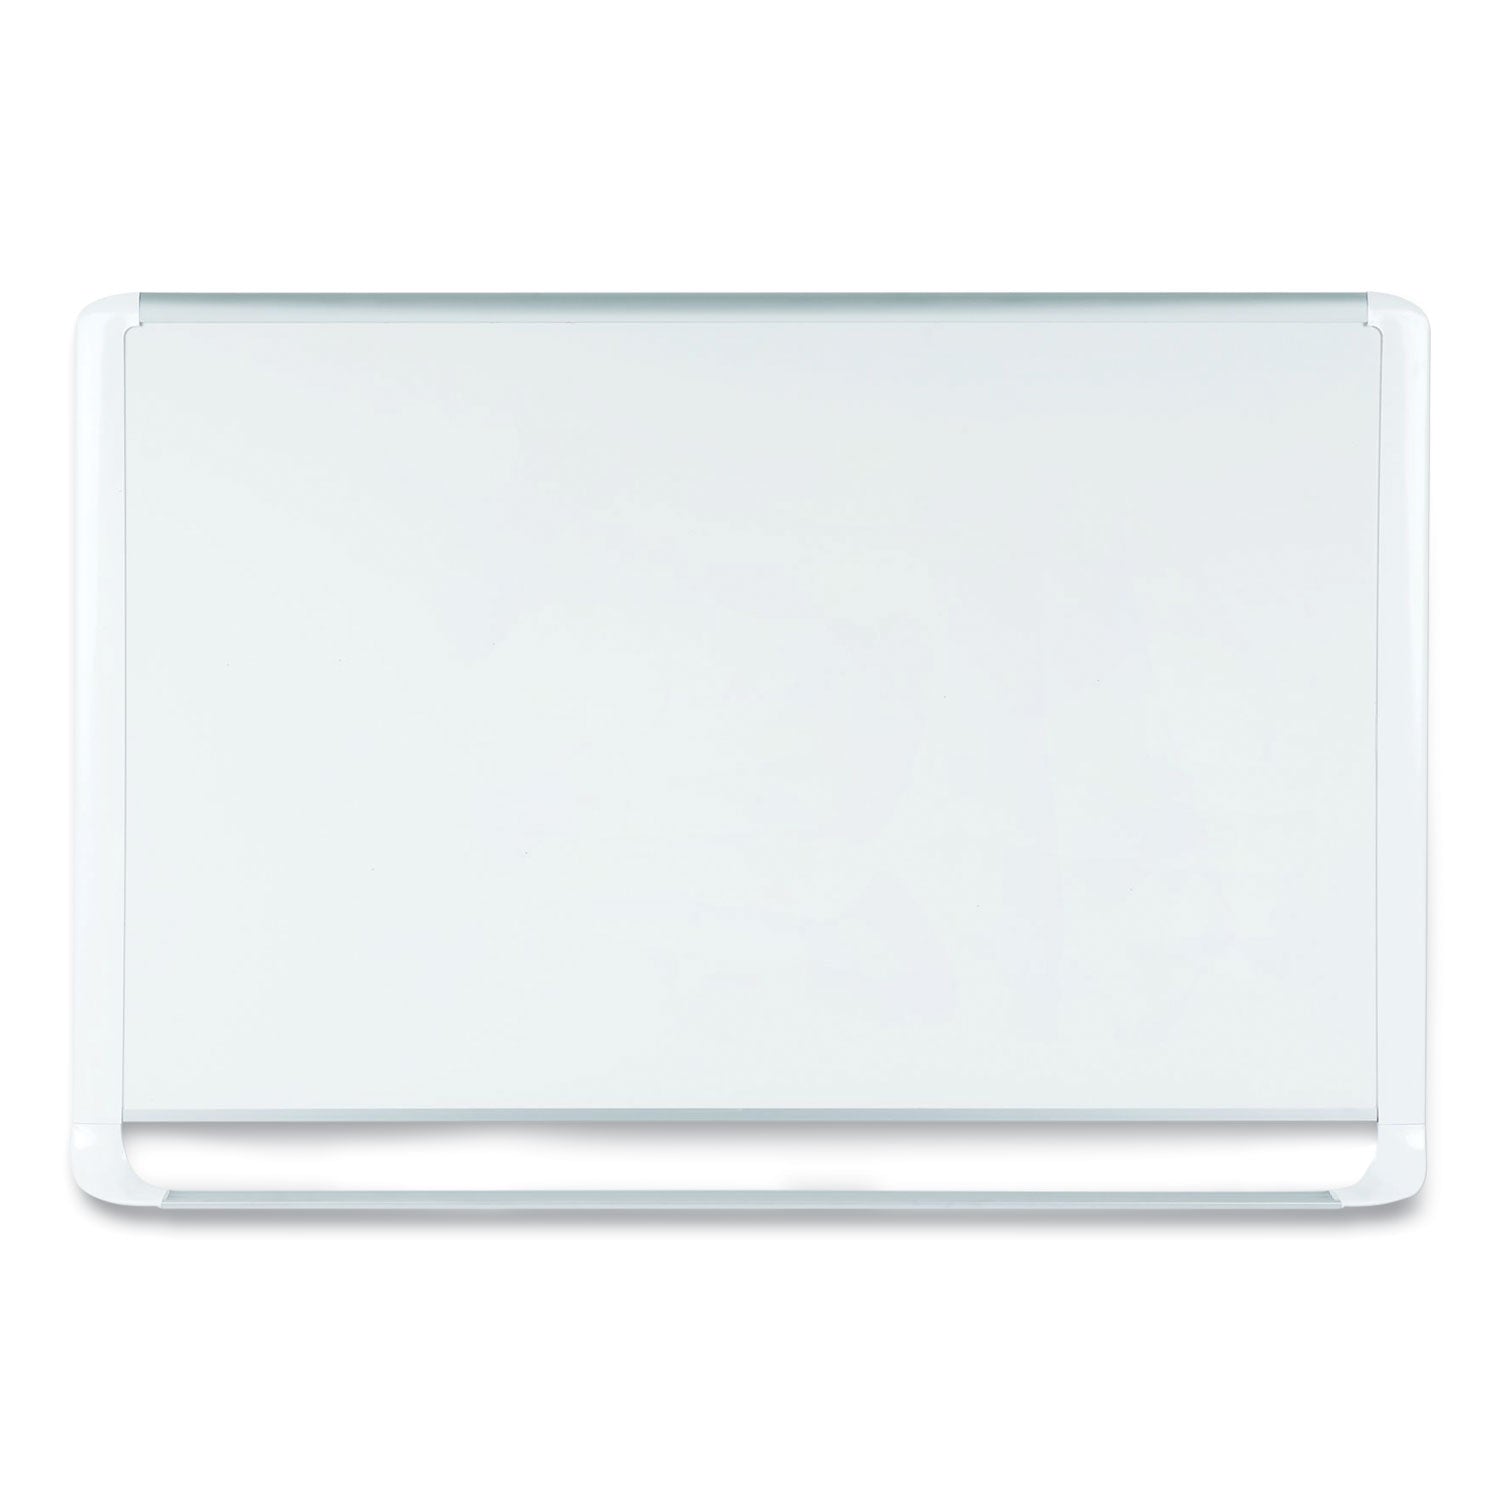 Gold Ultra Magnetic Dry Erase Boards, 36 x 24, White Surface, White Aluminum Frame - 